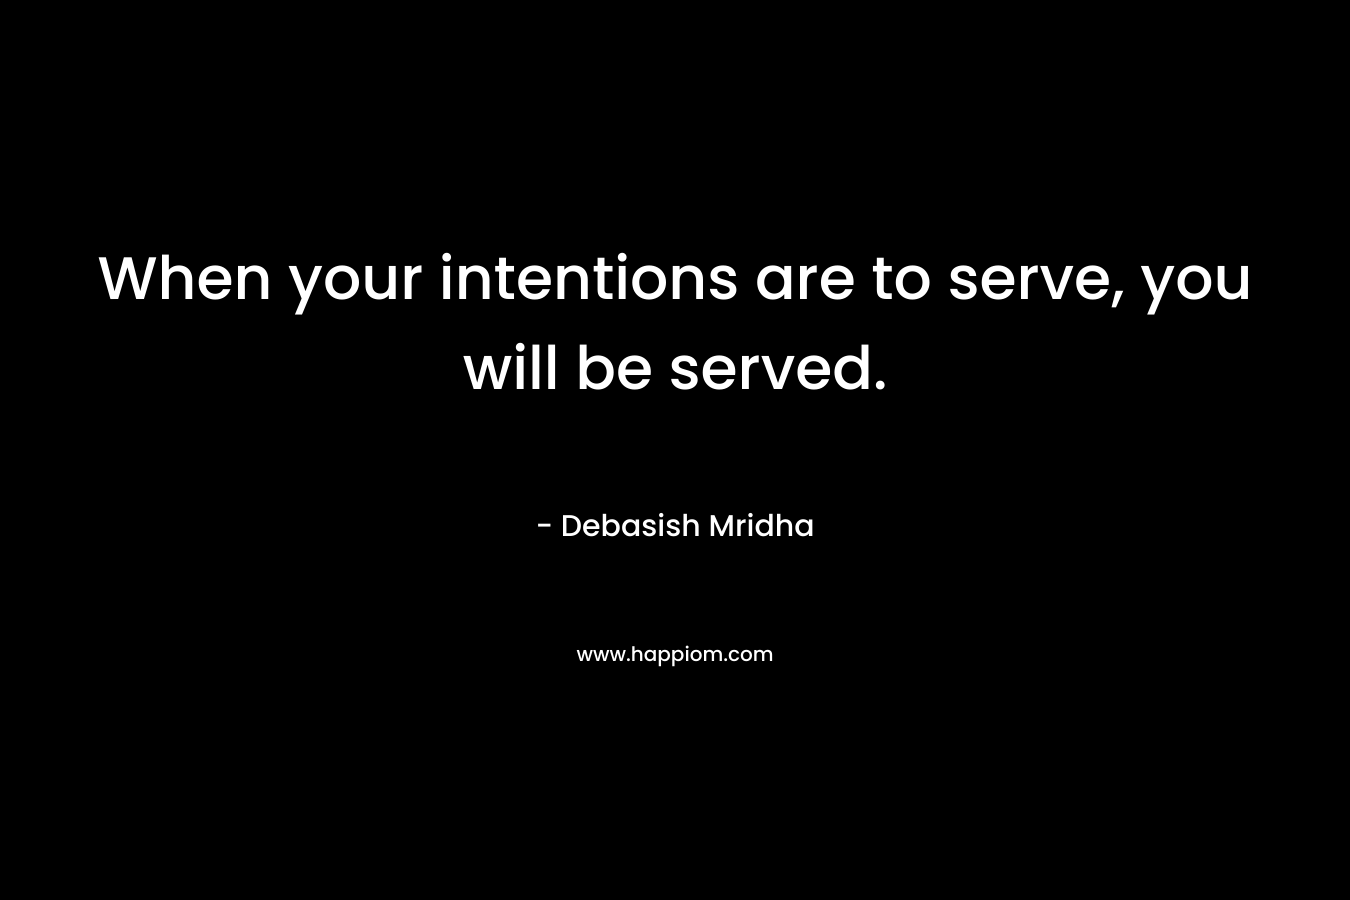 When your intentions are to serve, you will be served.